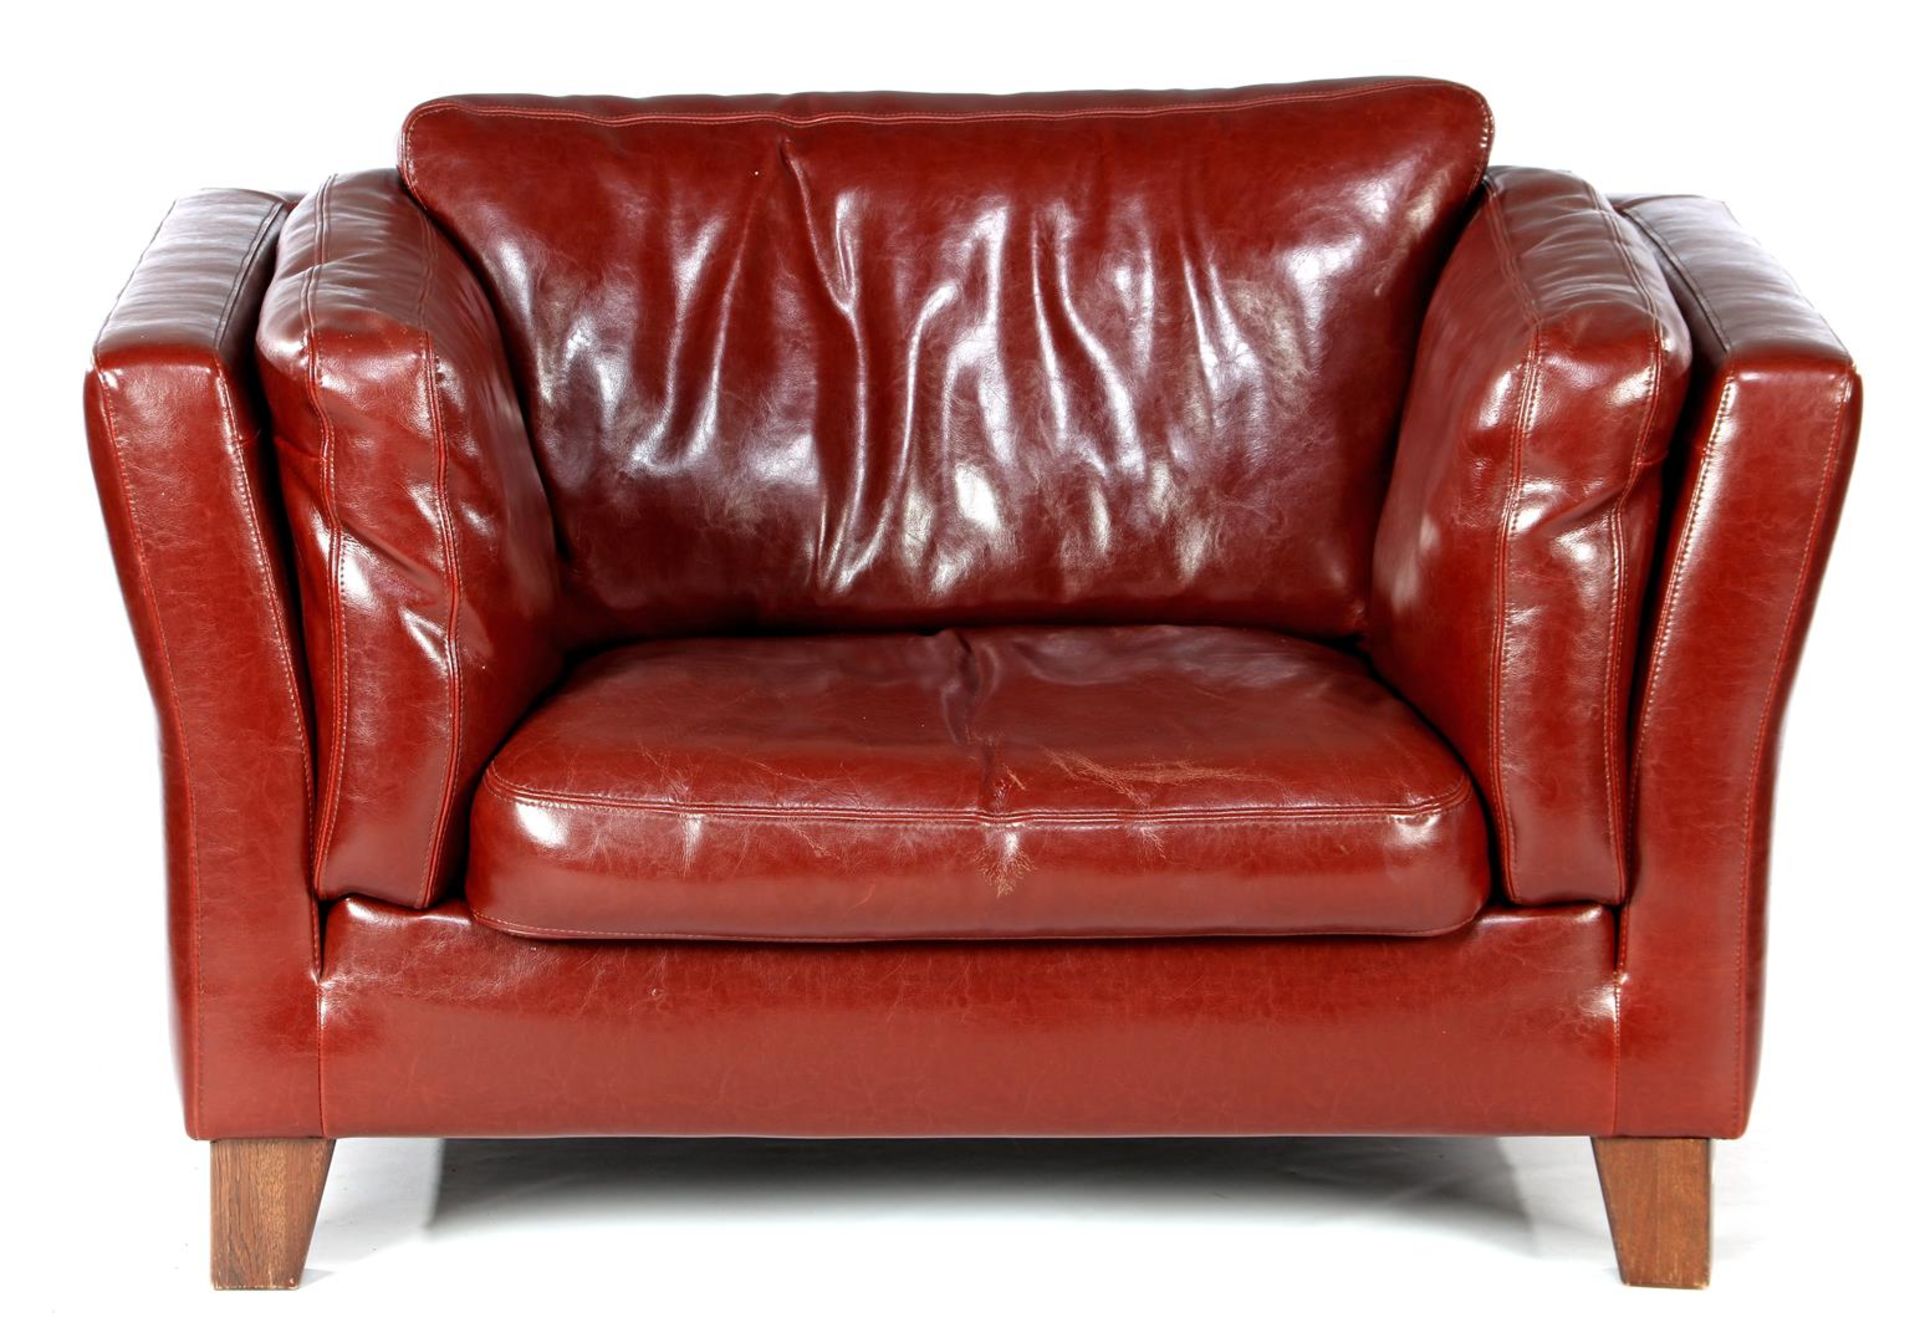 Brown leather love seat - Image 2 of 2